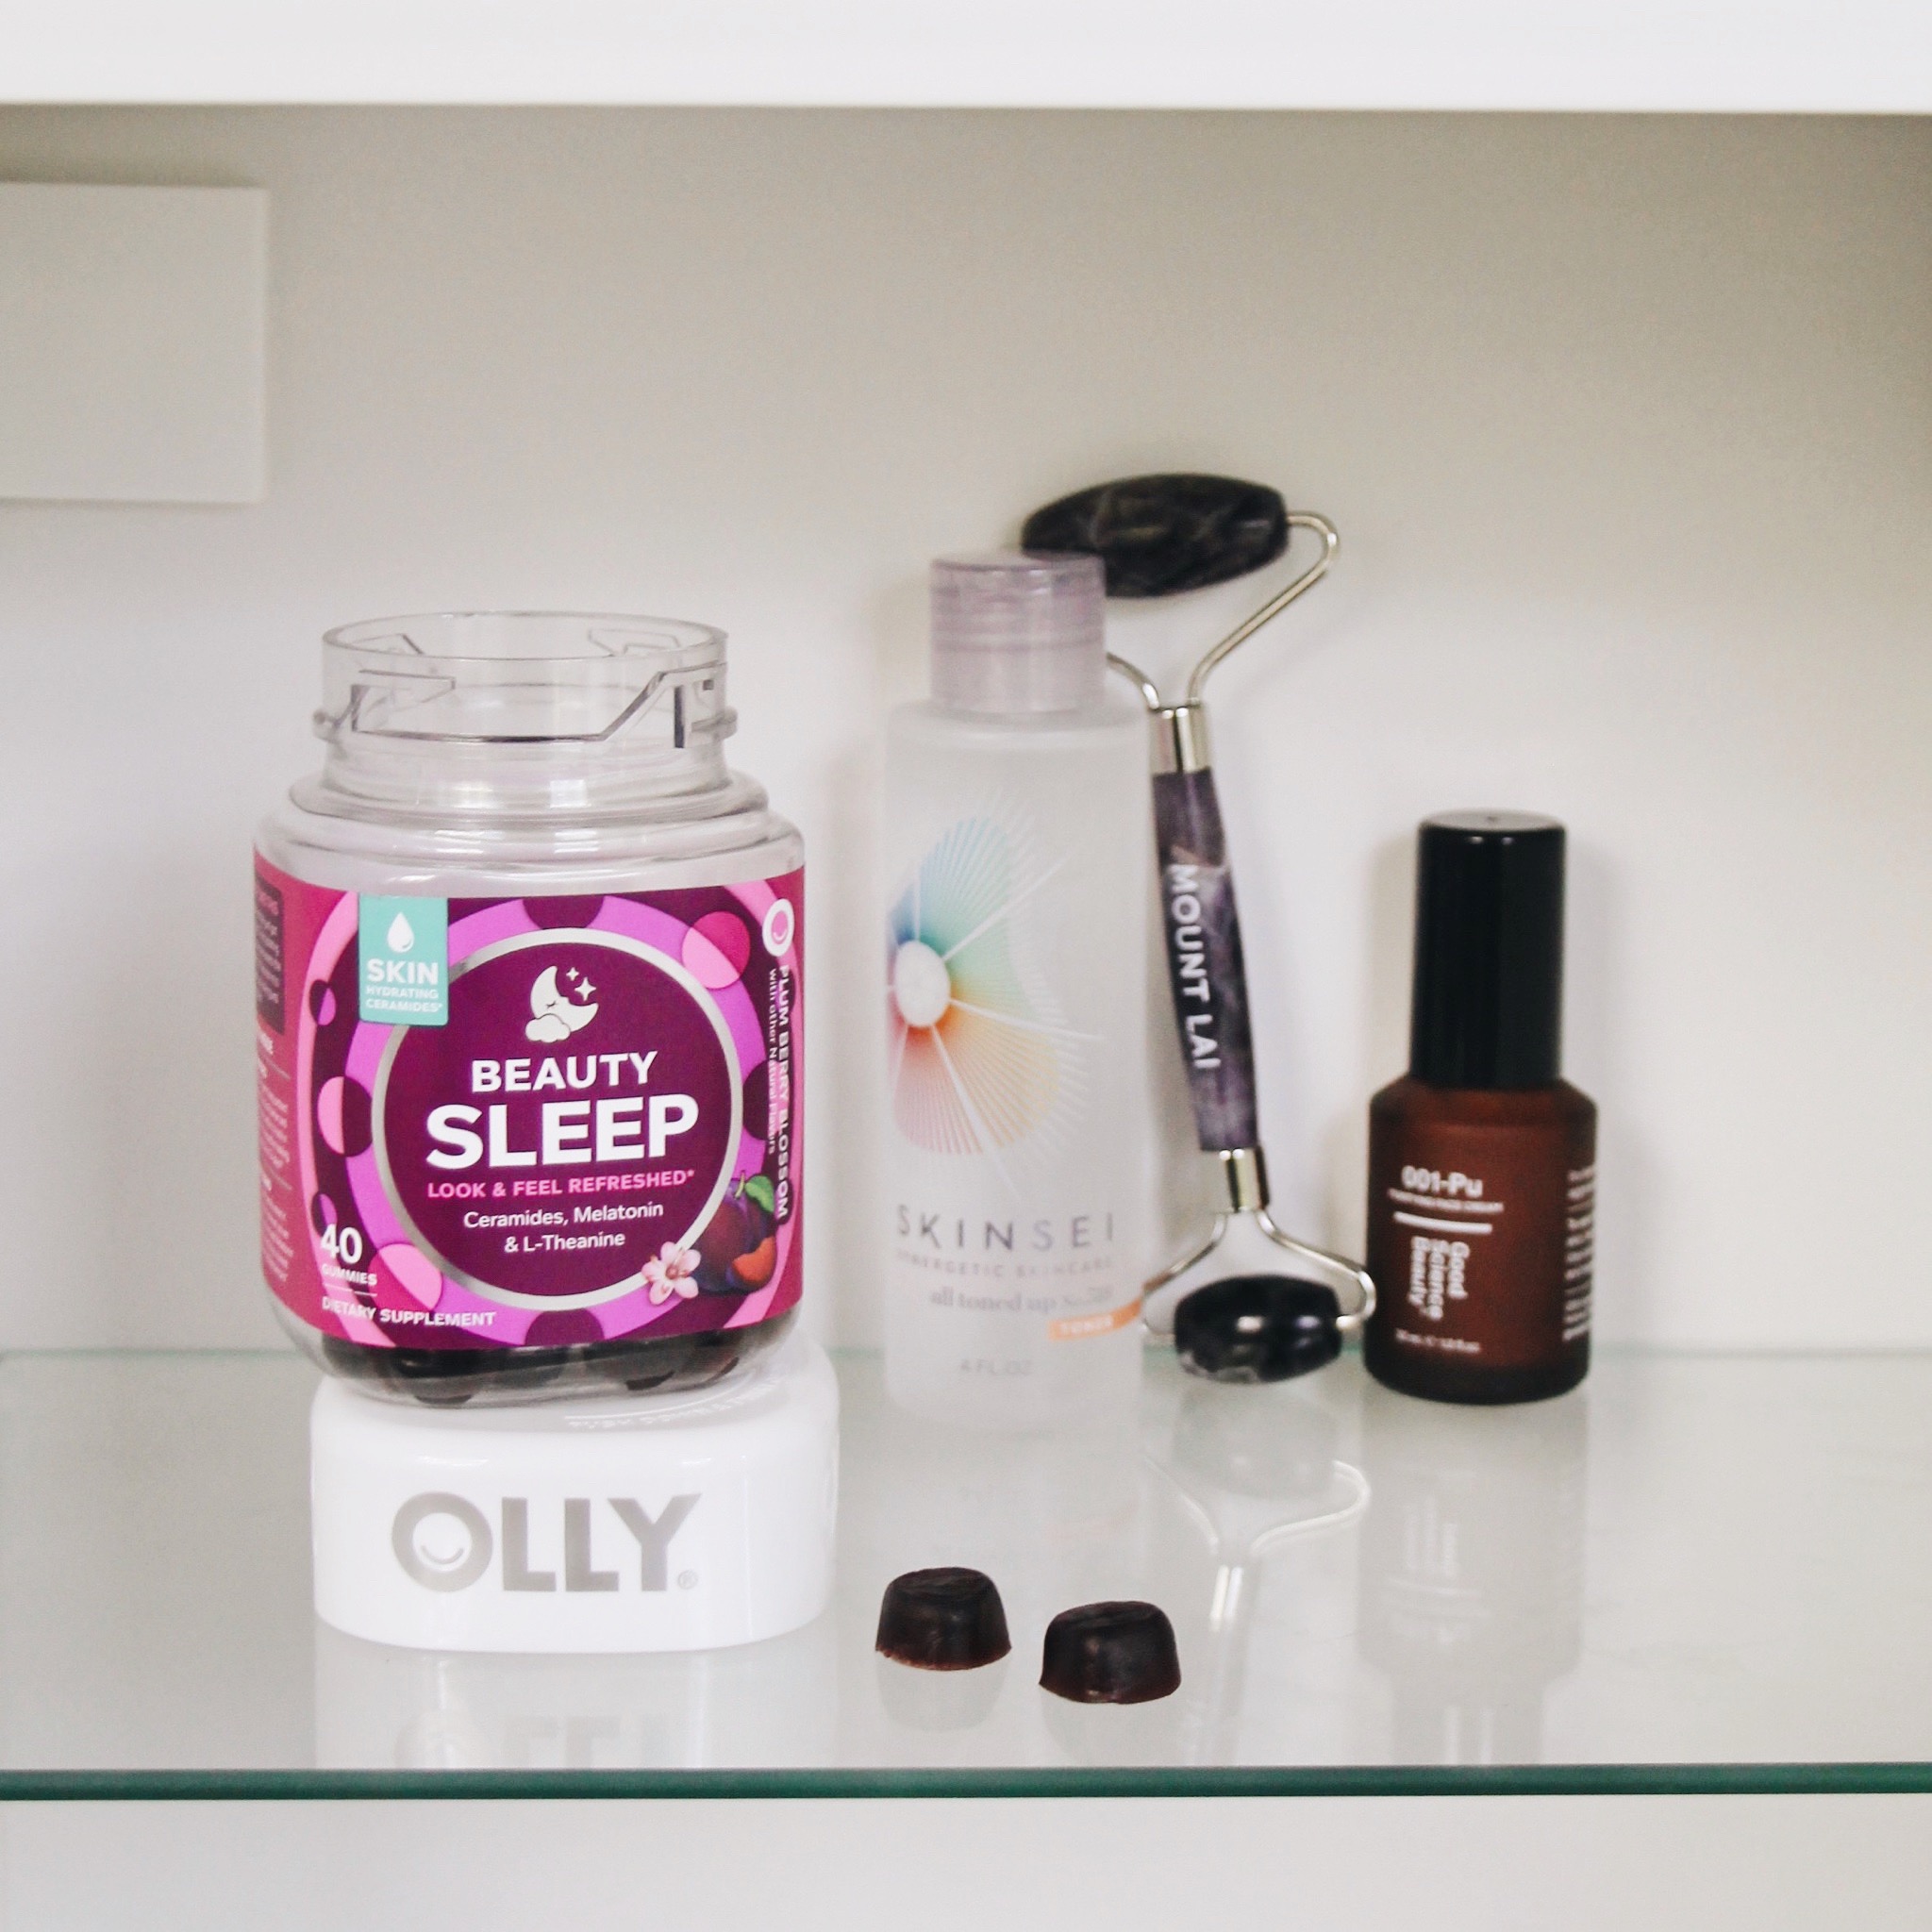 My Nighttime Routine With Olly Nutrition Beauty Sleep, Skincare Routine, Evening Skincare Routine, Bedtime Routine, Olly Nutrition, Beauty Sleep Gummies